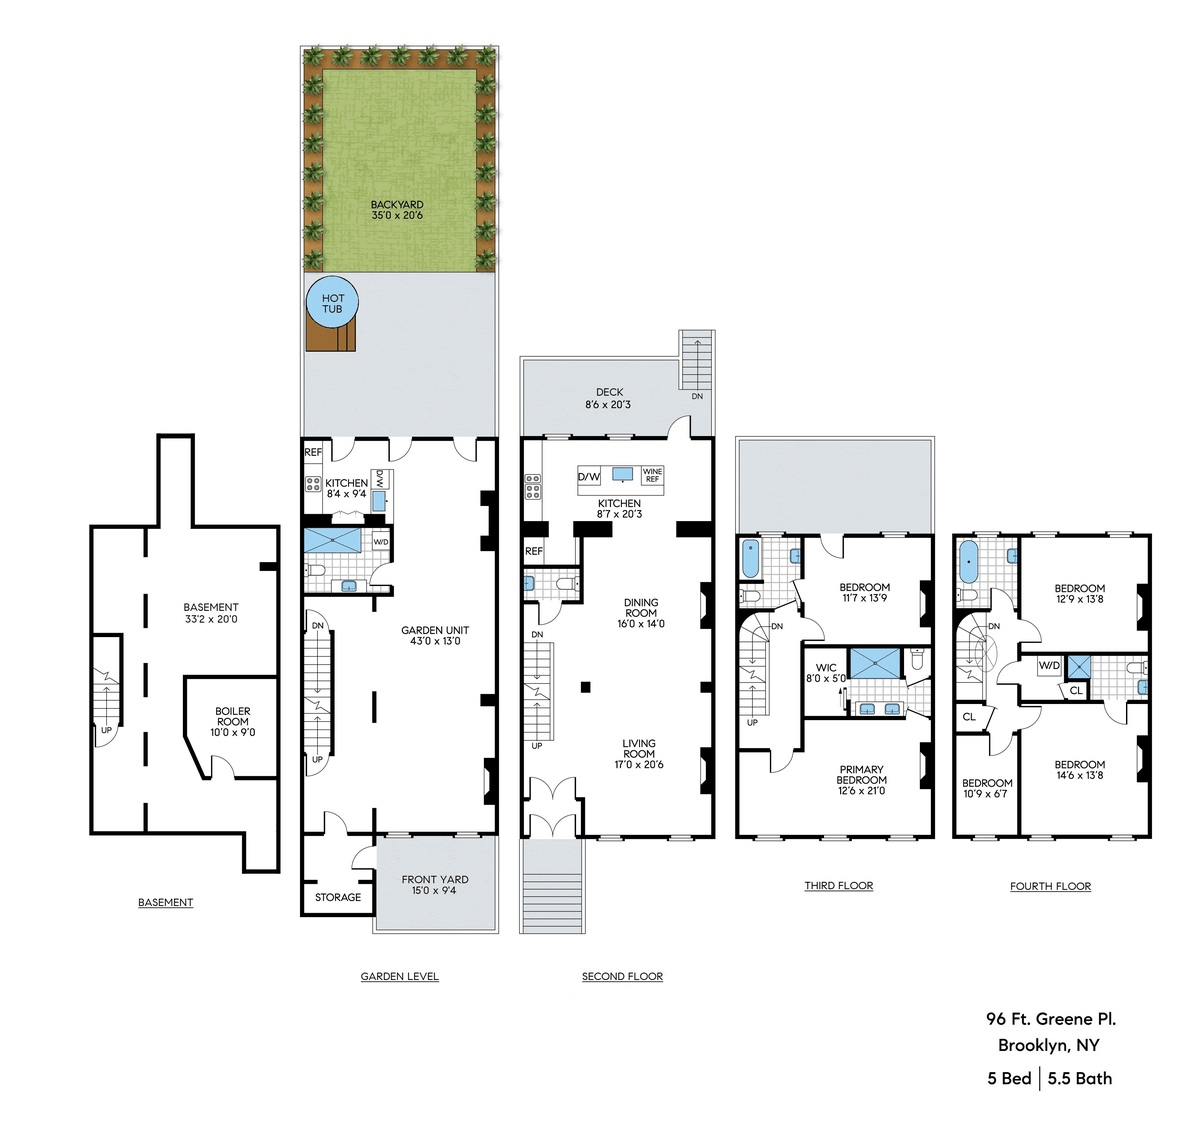 floorplans showing basement and four floors of living space